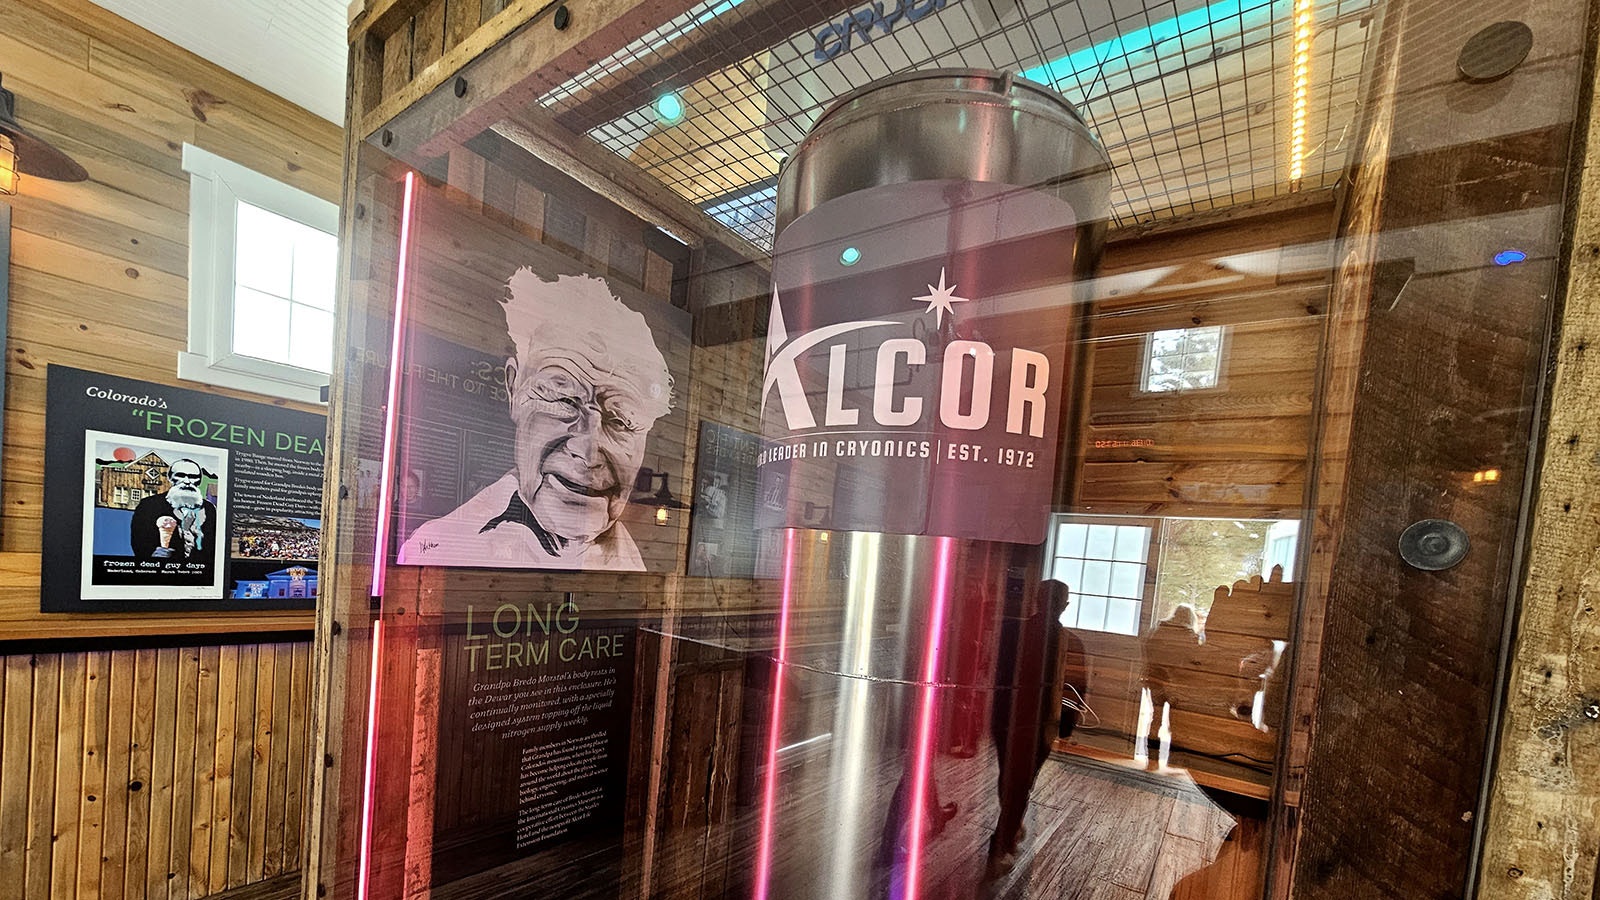 The smiling face of Bredo Morstol is among the first things visitors to the world's first International Cryonics Museum will see. The museum is set up at the Stanley Hotel in Estes Park, just a couple hours south of Wyoming.